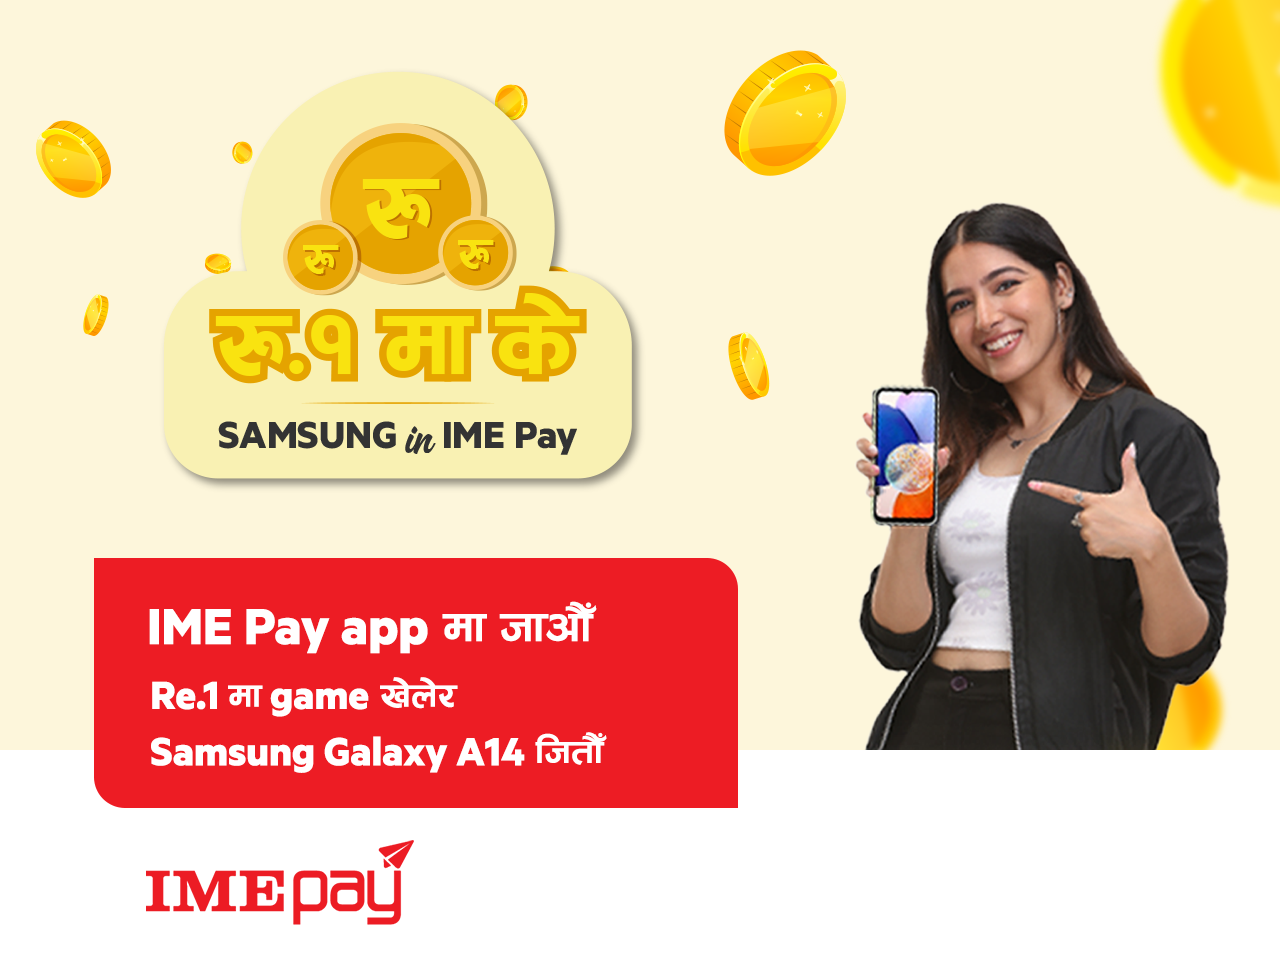 ‘IME Pay’ launches ‘Rs. 1’s game on IME Pay app’ offer